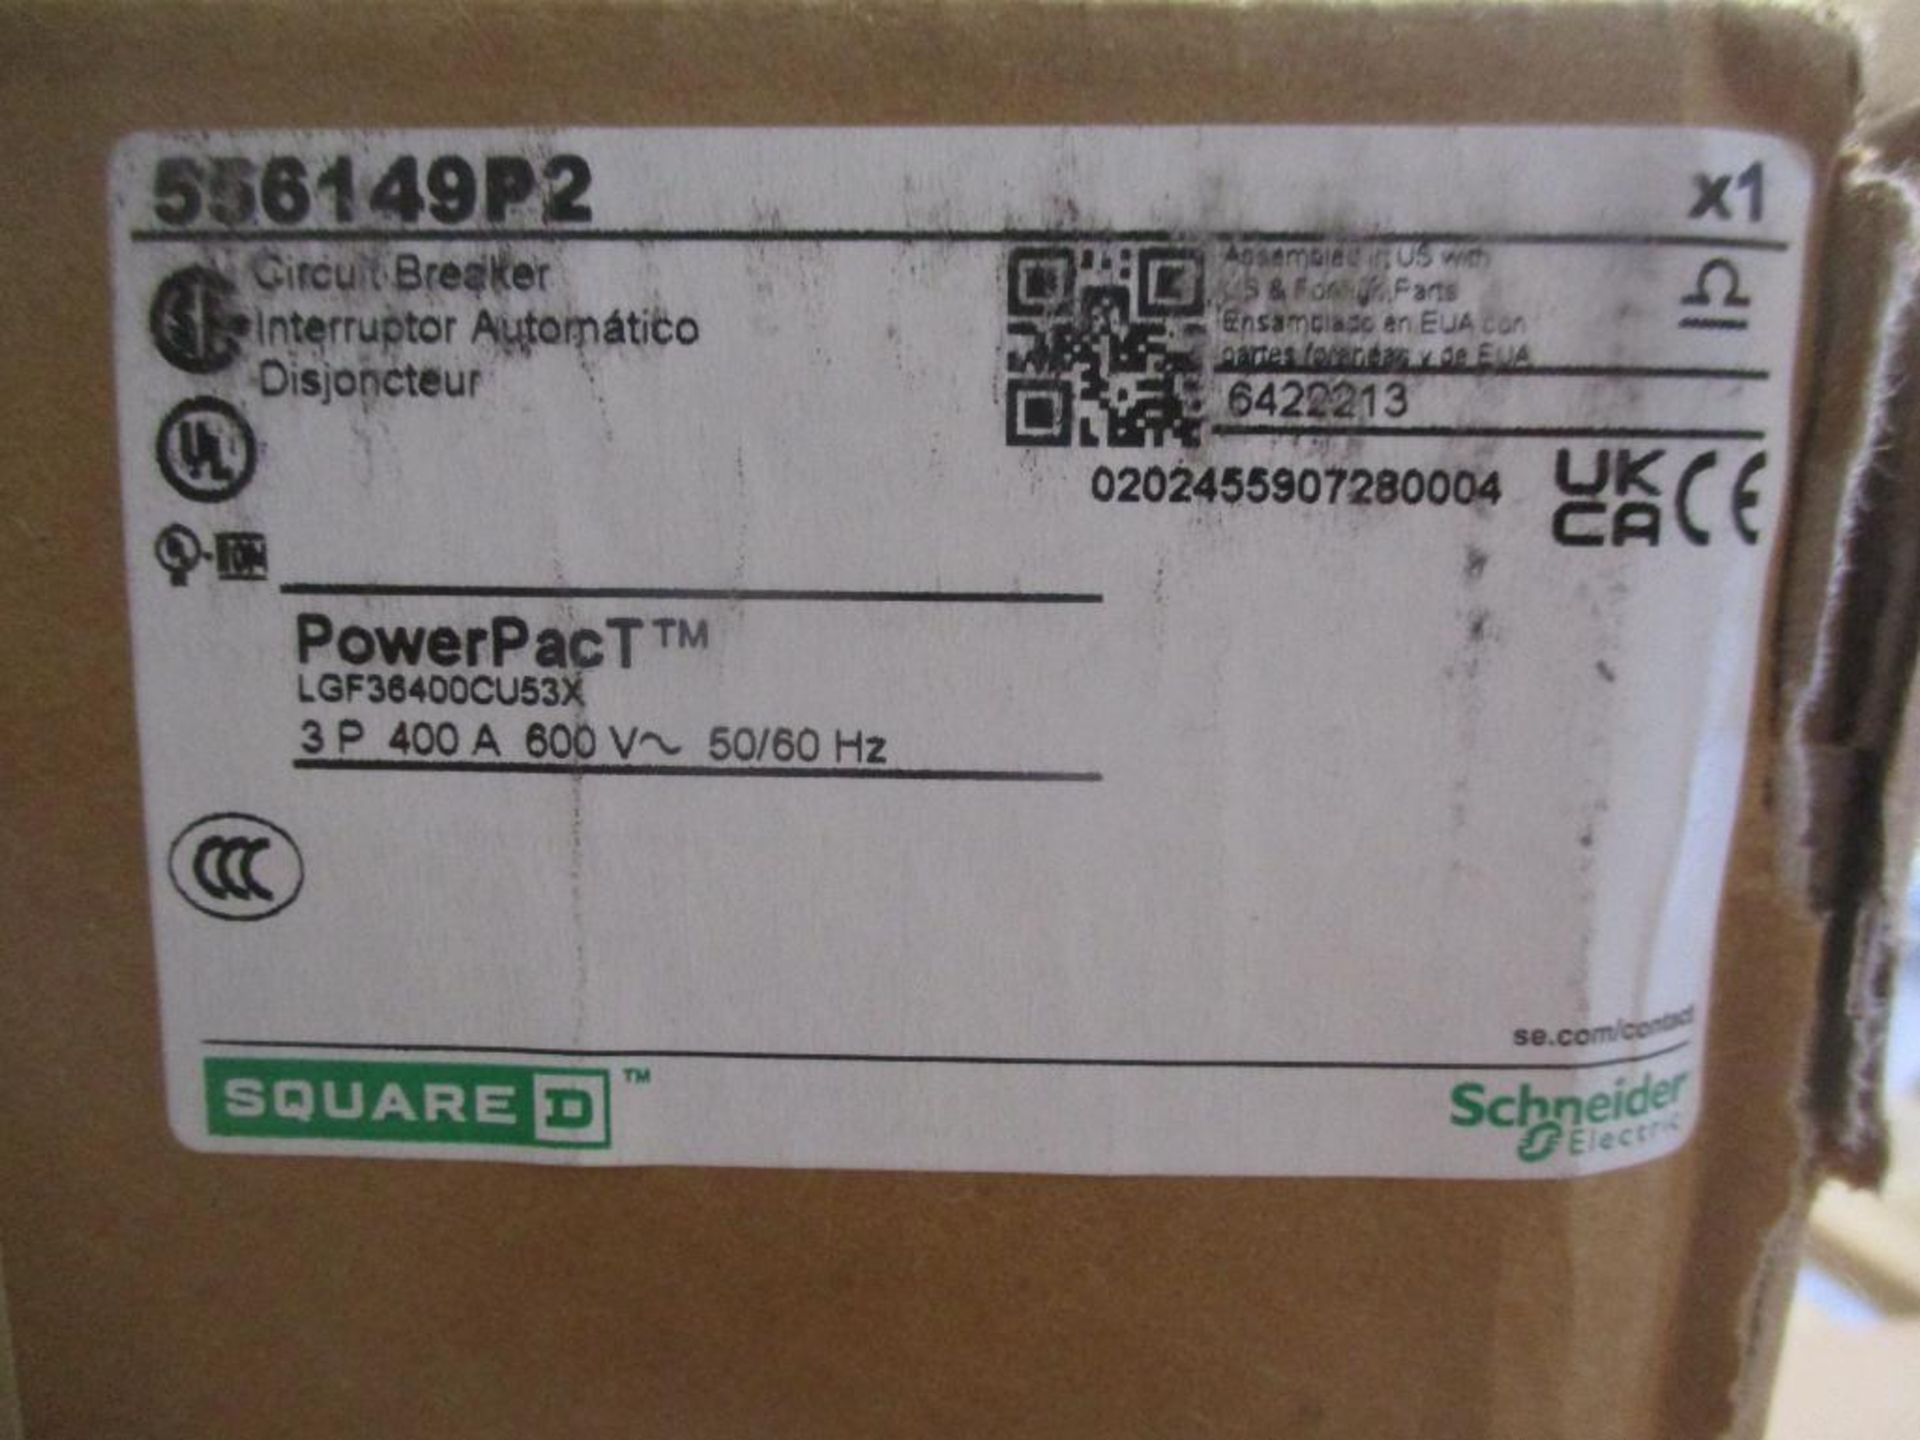 Square D 400 AMP Circuit Breaker, 556149P2, 3P, 400A, 600VAC, PowerPacT LG 400 (New in Box) - Image 4 of 4